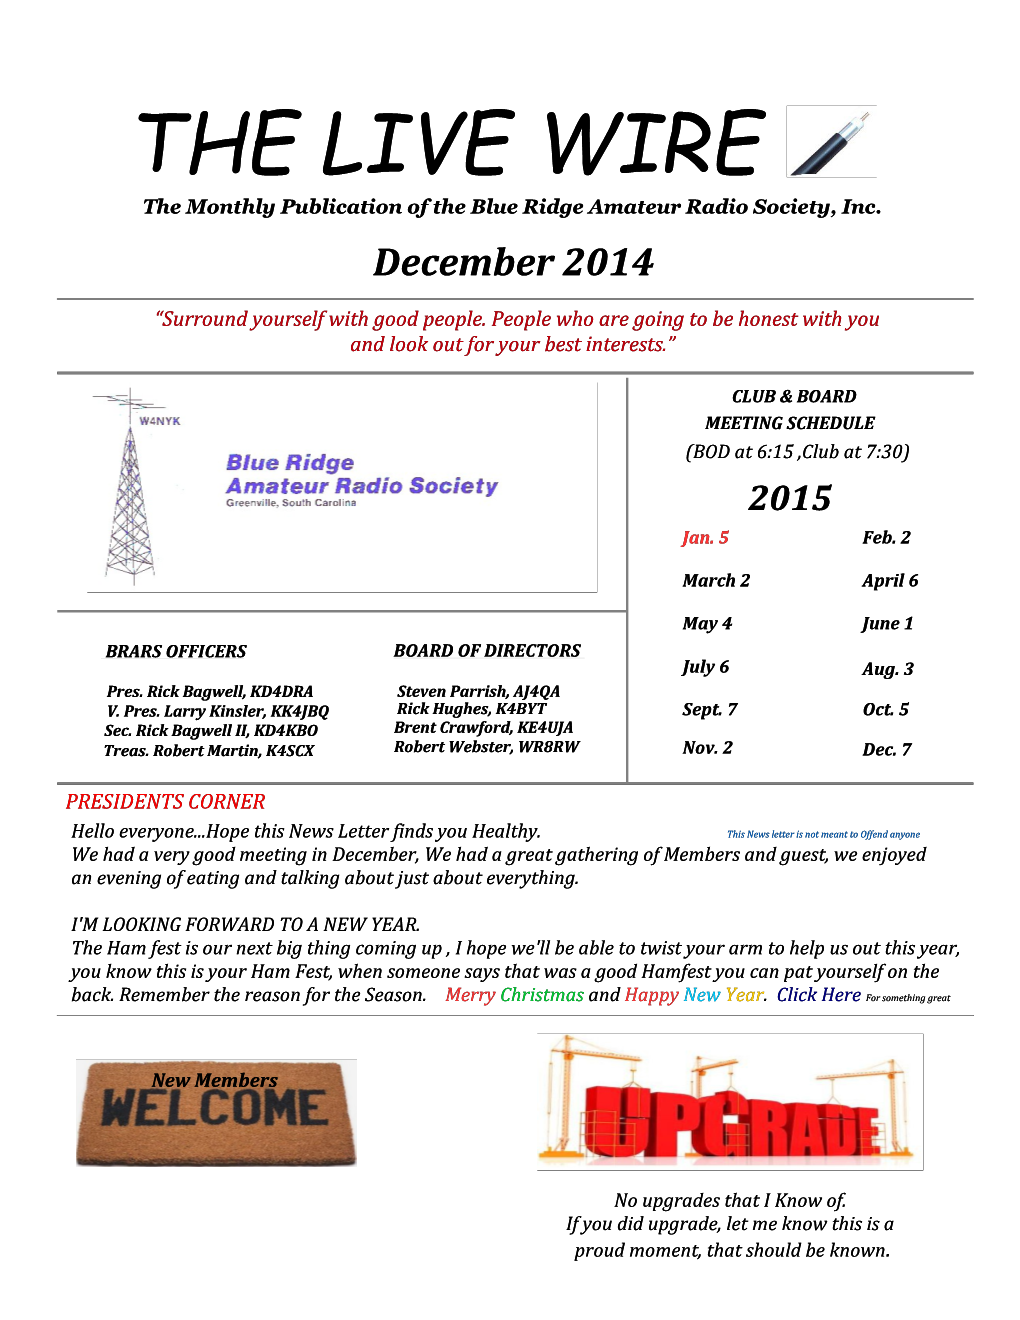 THE LIVE WIRE the Monthly Publication of the Blue Ridge Amateur Radio Society, Inc